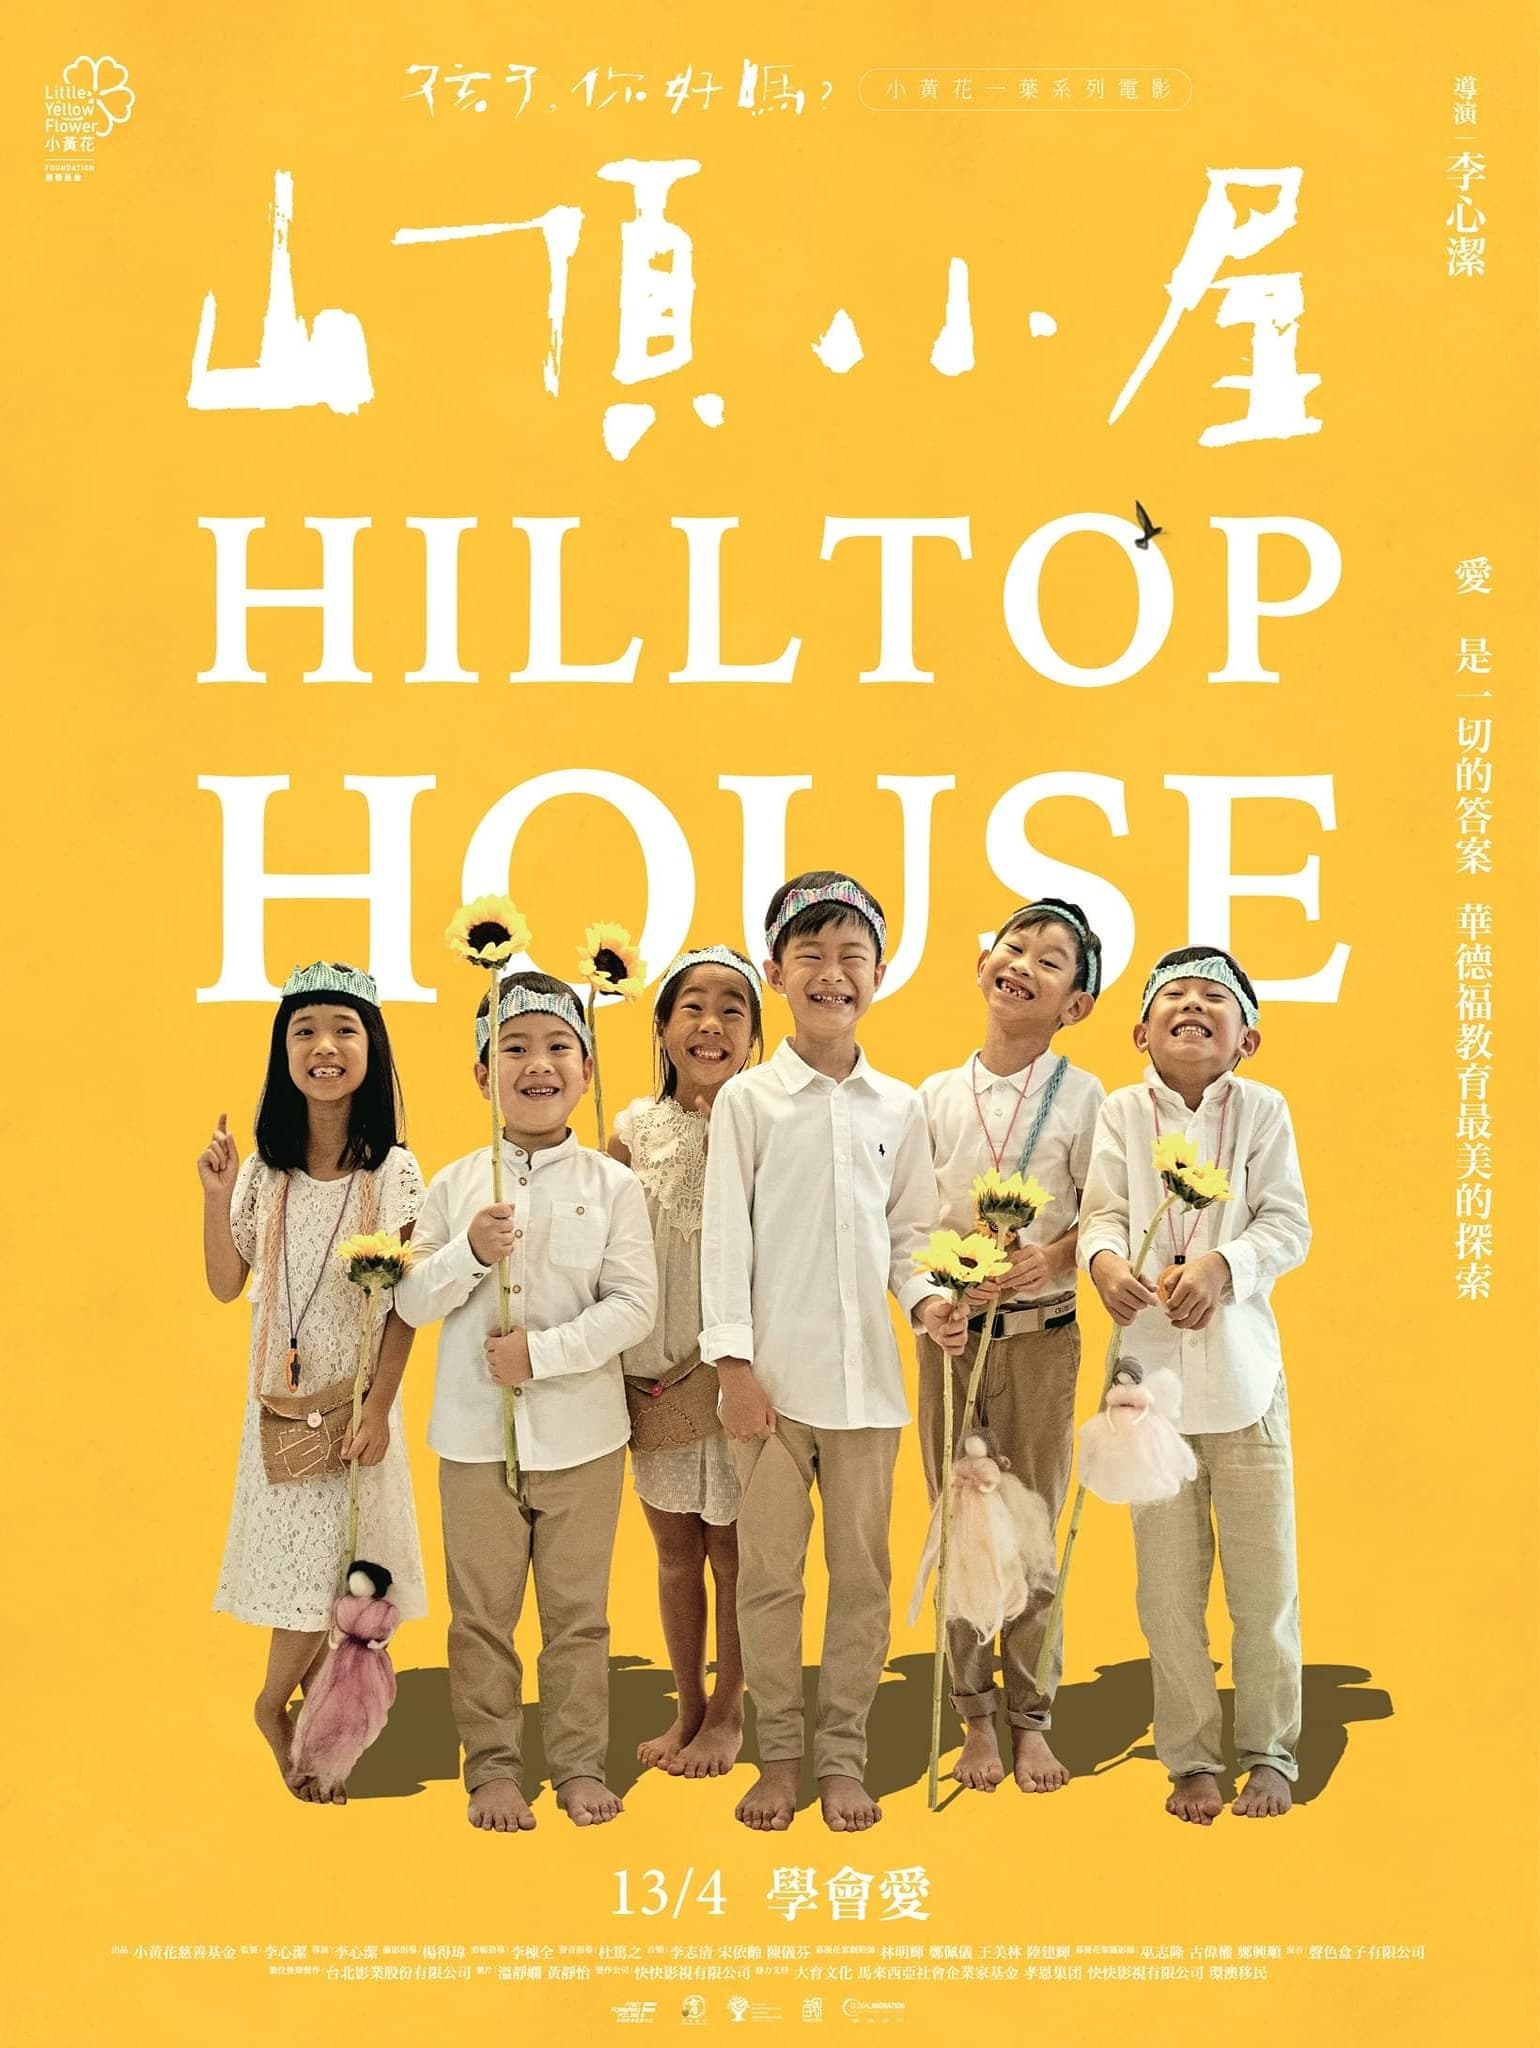 Hilltop House (Dear Child, How Are You?)